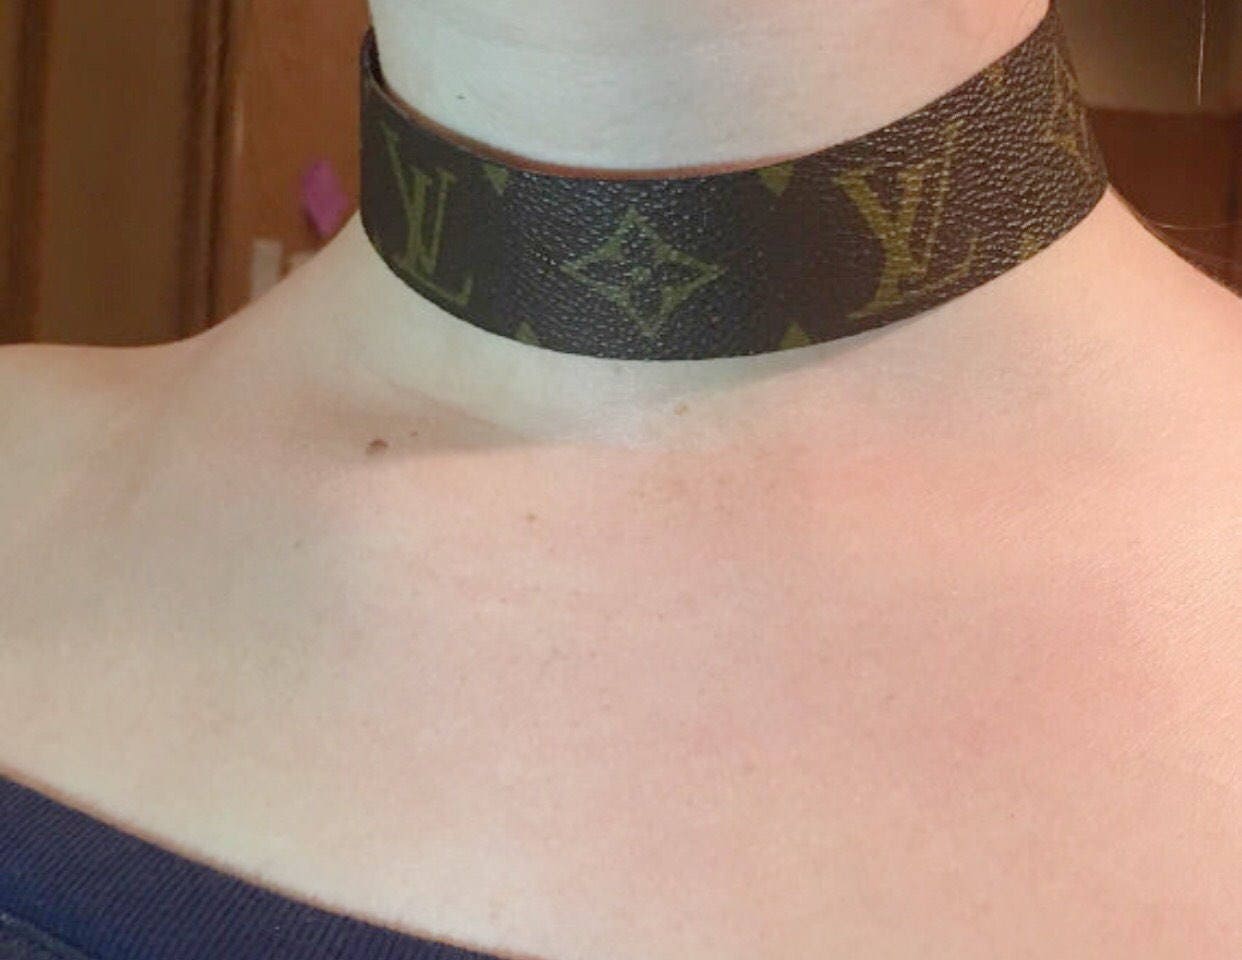 Louis Vuitton Choker Necklace made with Authentic Upcycled